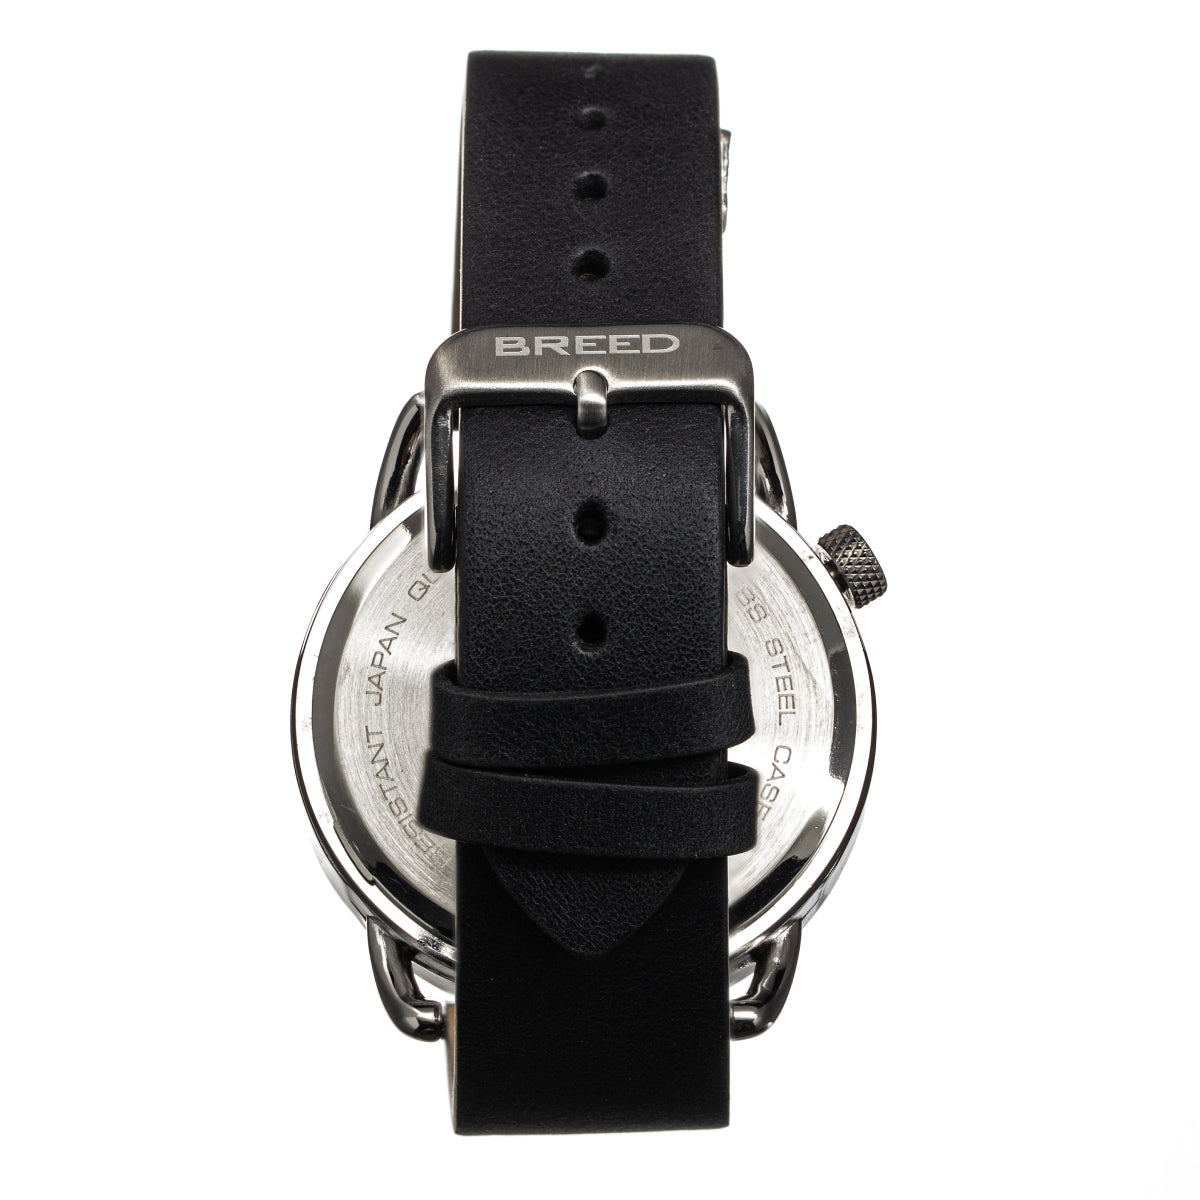 Breed Regulator Leather-Band Watch w/Second Sub-dial - Black - BRD8806